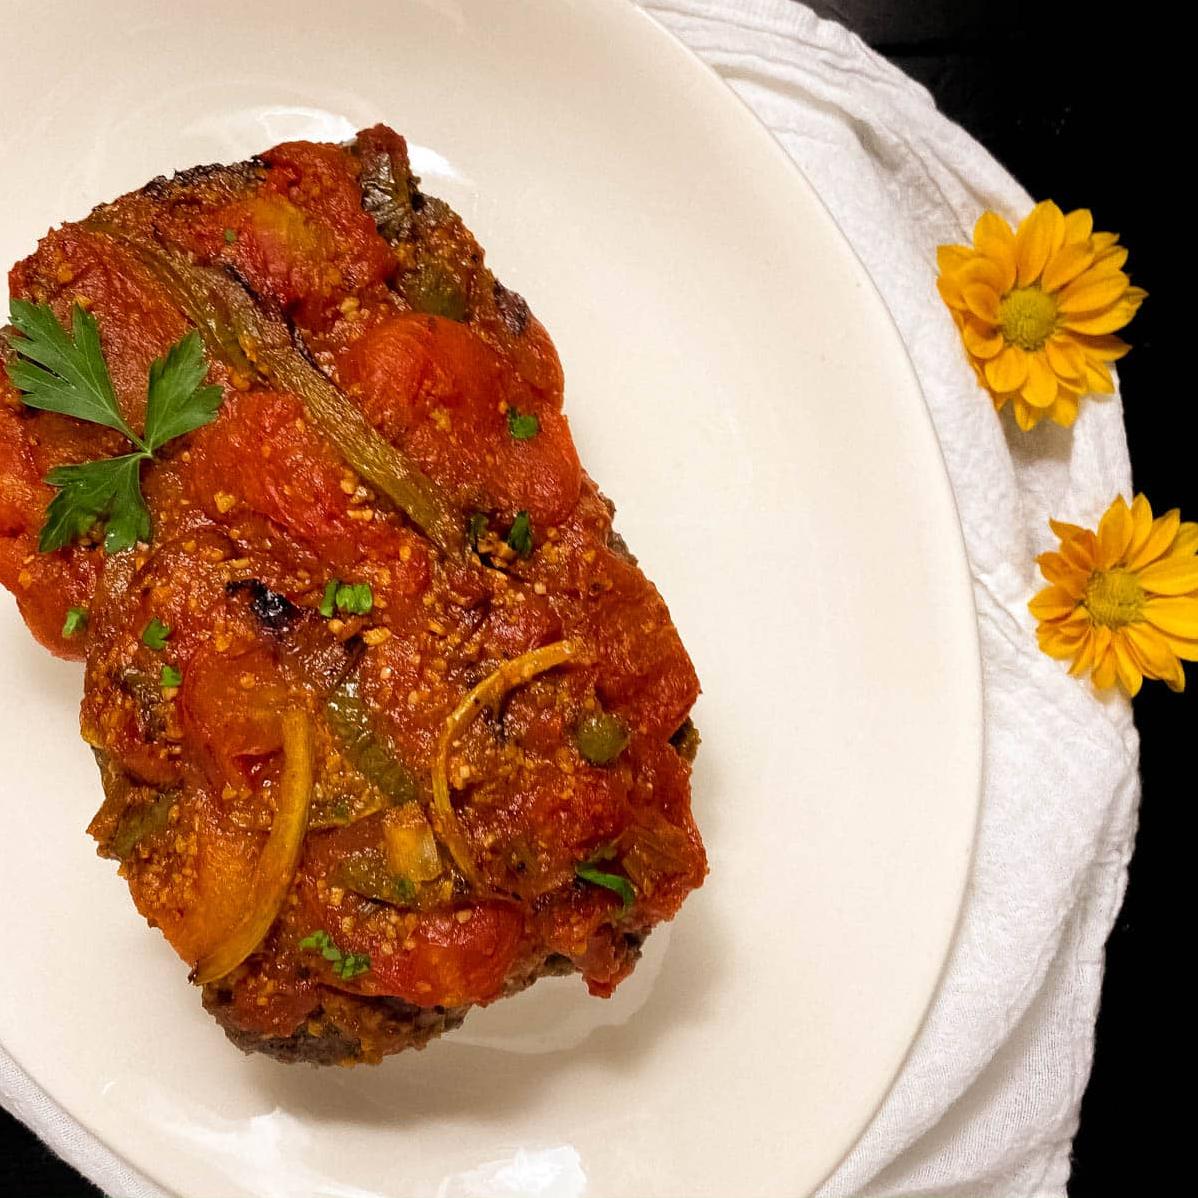 Mouthwatering Creole Meatloaf Recipe for Weekend Dinner